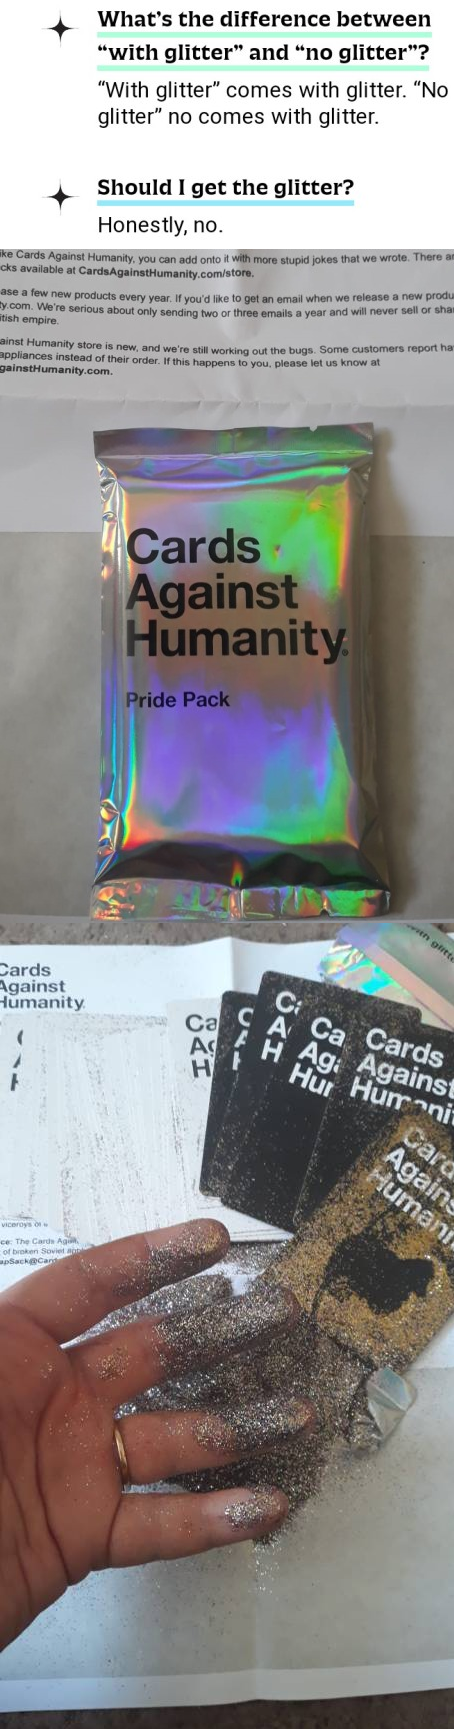 Cards Against Humanity issued a Pride pack, complete with warning.